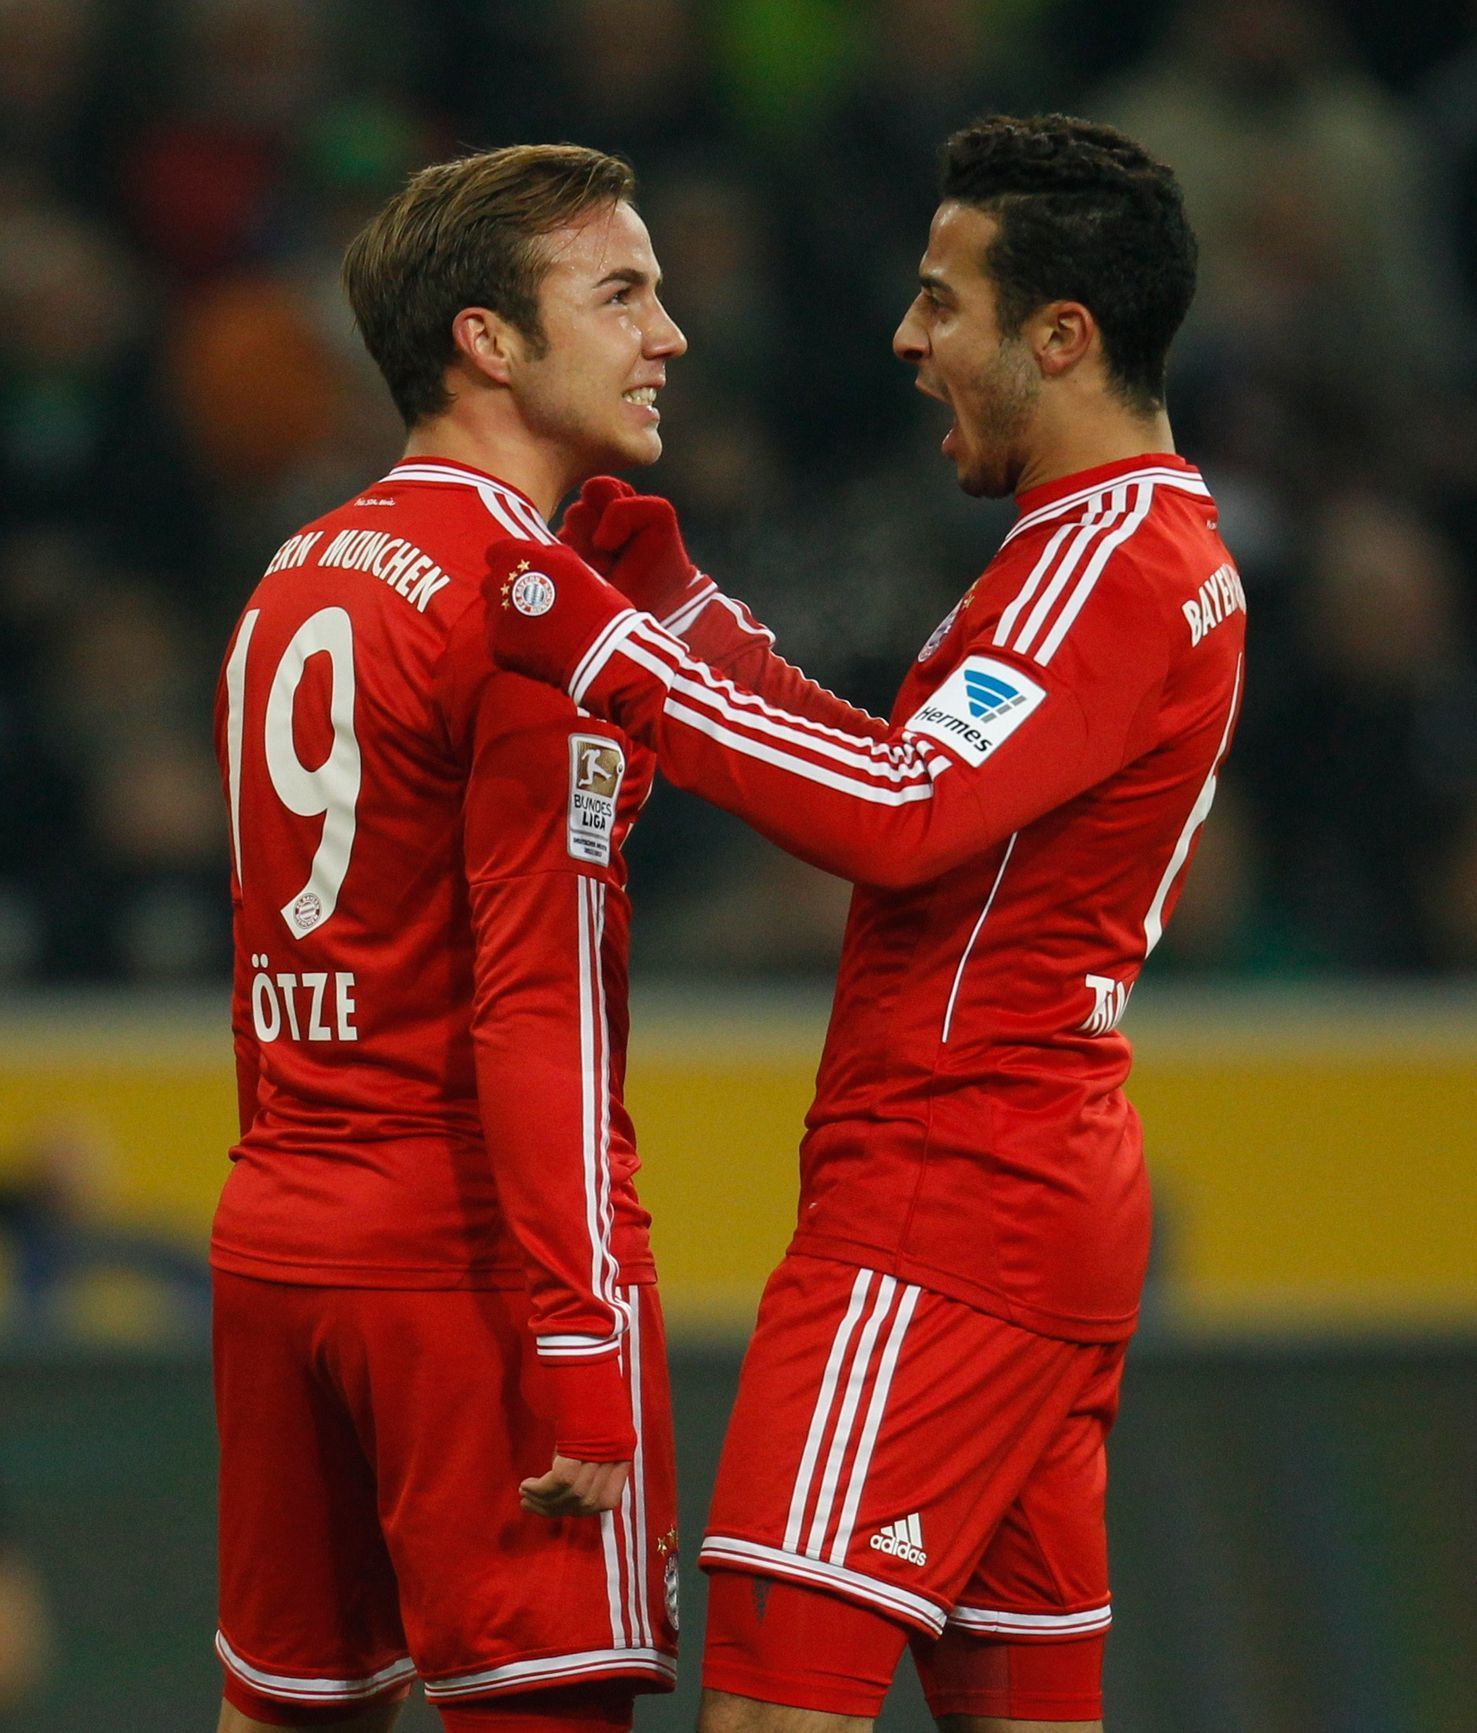 Bayern Munich's Goetze and Thiago celebrate a goal against Borussia Moenchengladbach during the German first division Bundesliga soccer match in Moenchengladbach